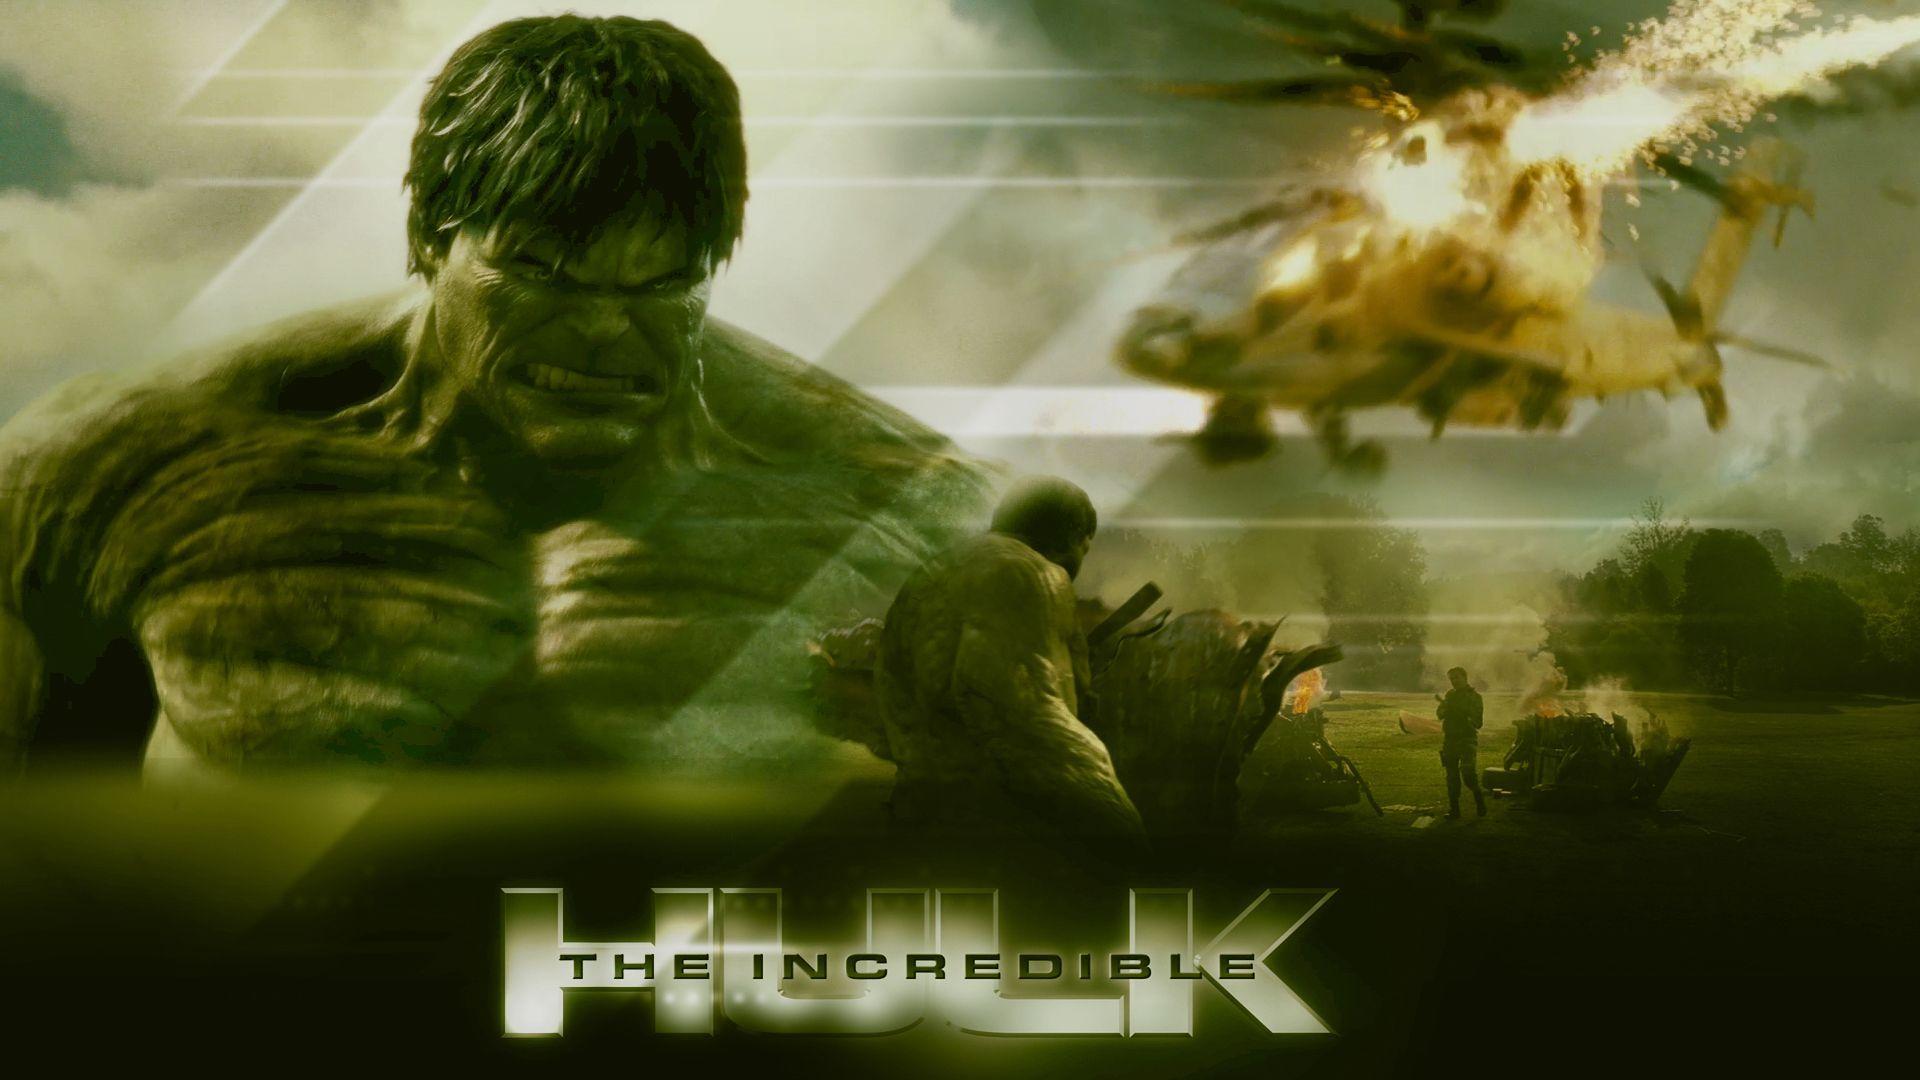 The Official Incredible Hulk Fan Art and Manips Thread